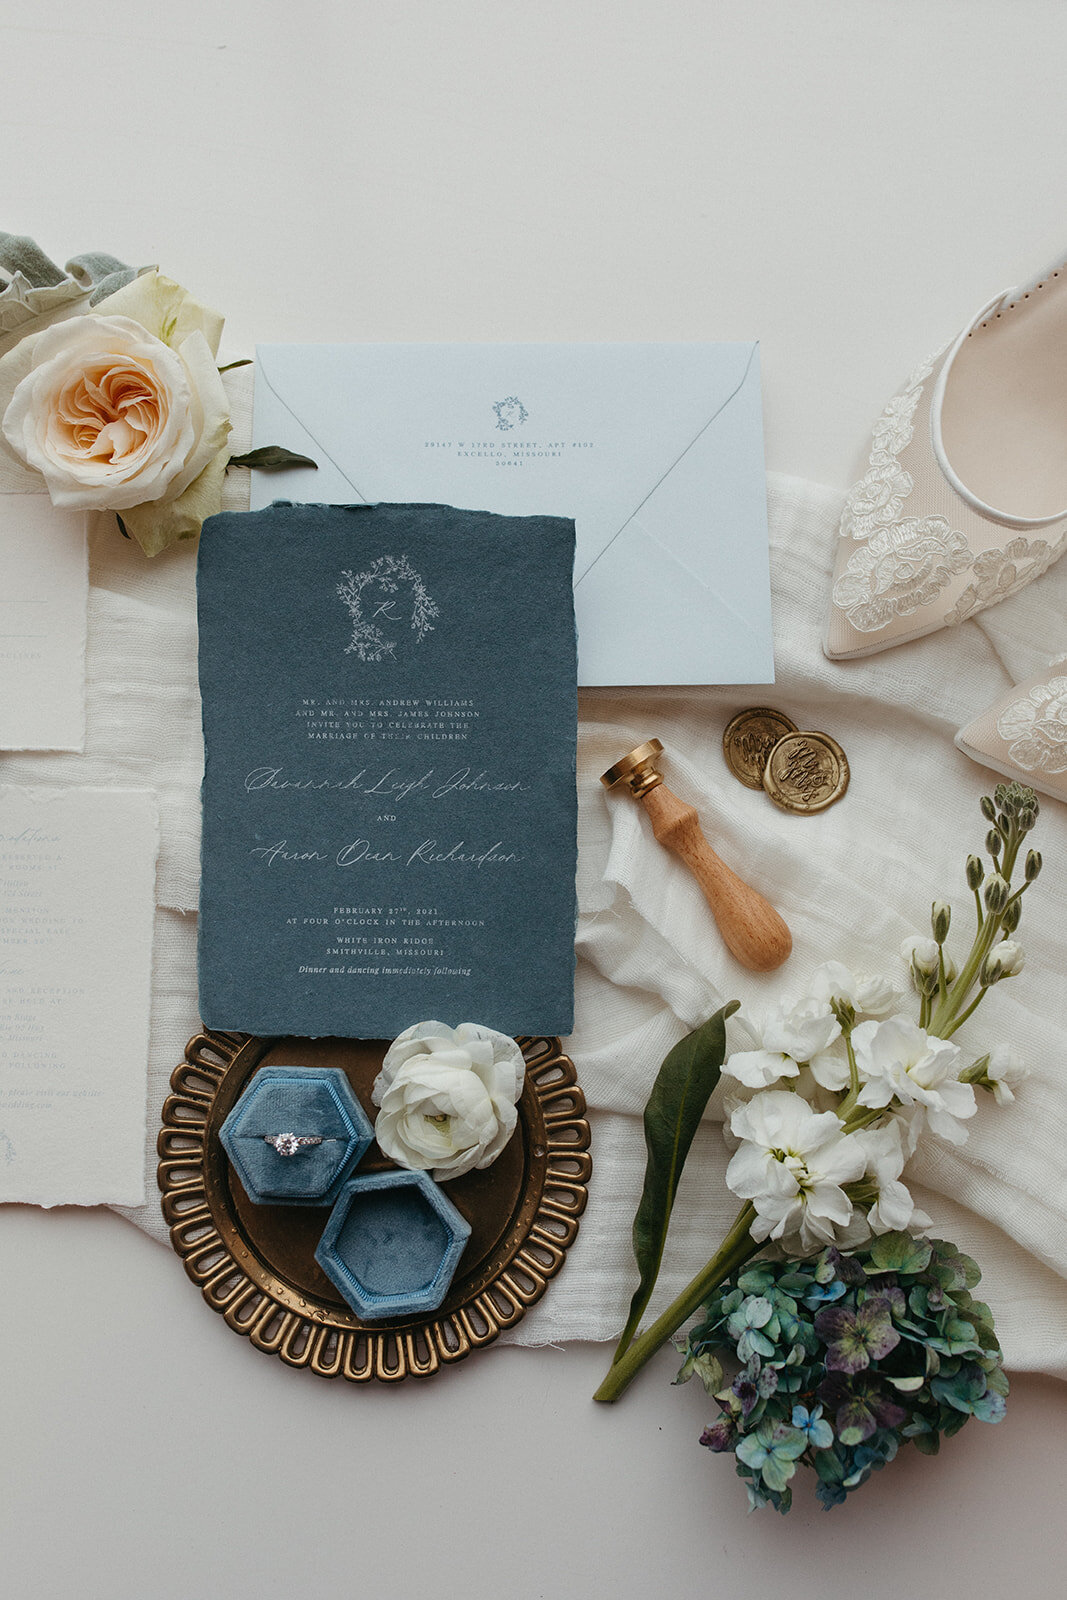 An assortment of blue and gray wedding stationery with white cursive next to a wedding ring, flowers and white wedding heels.